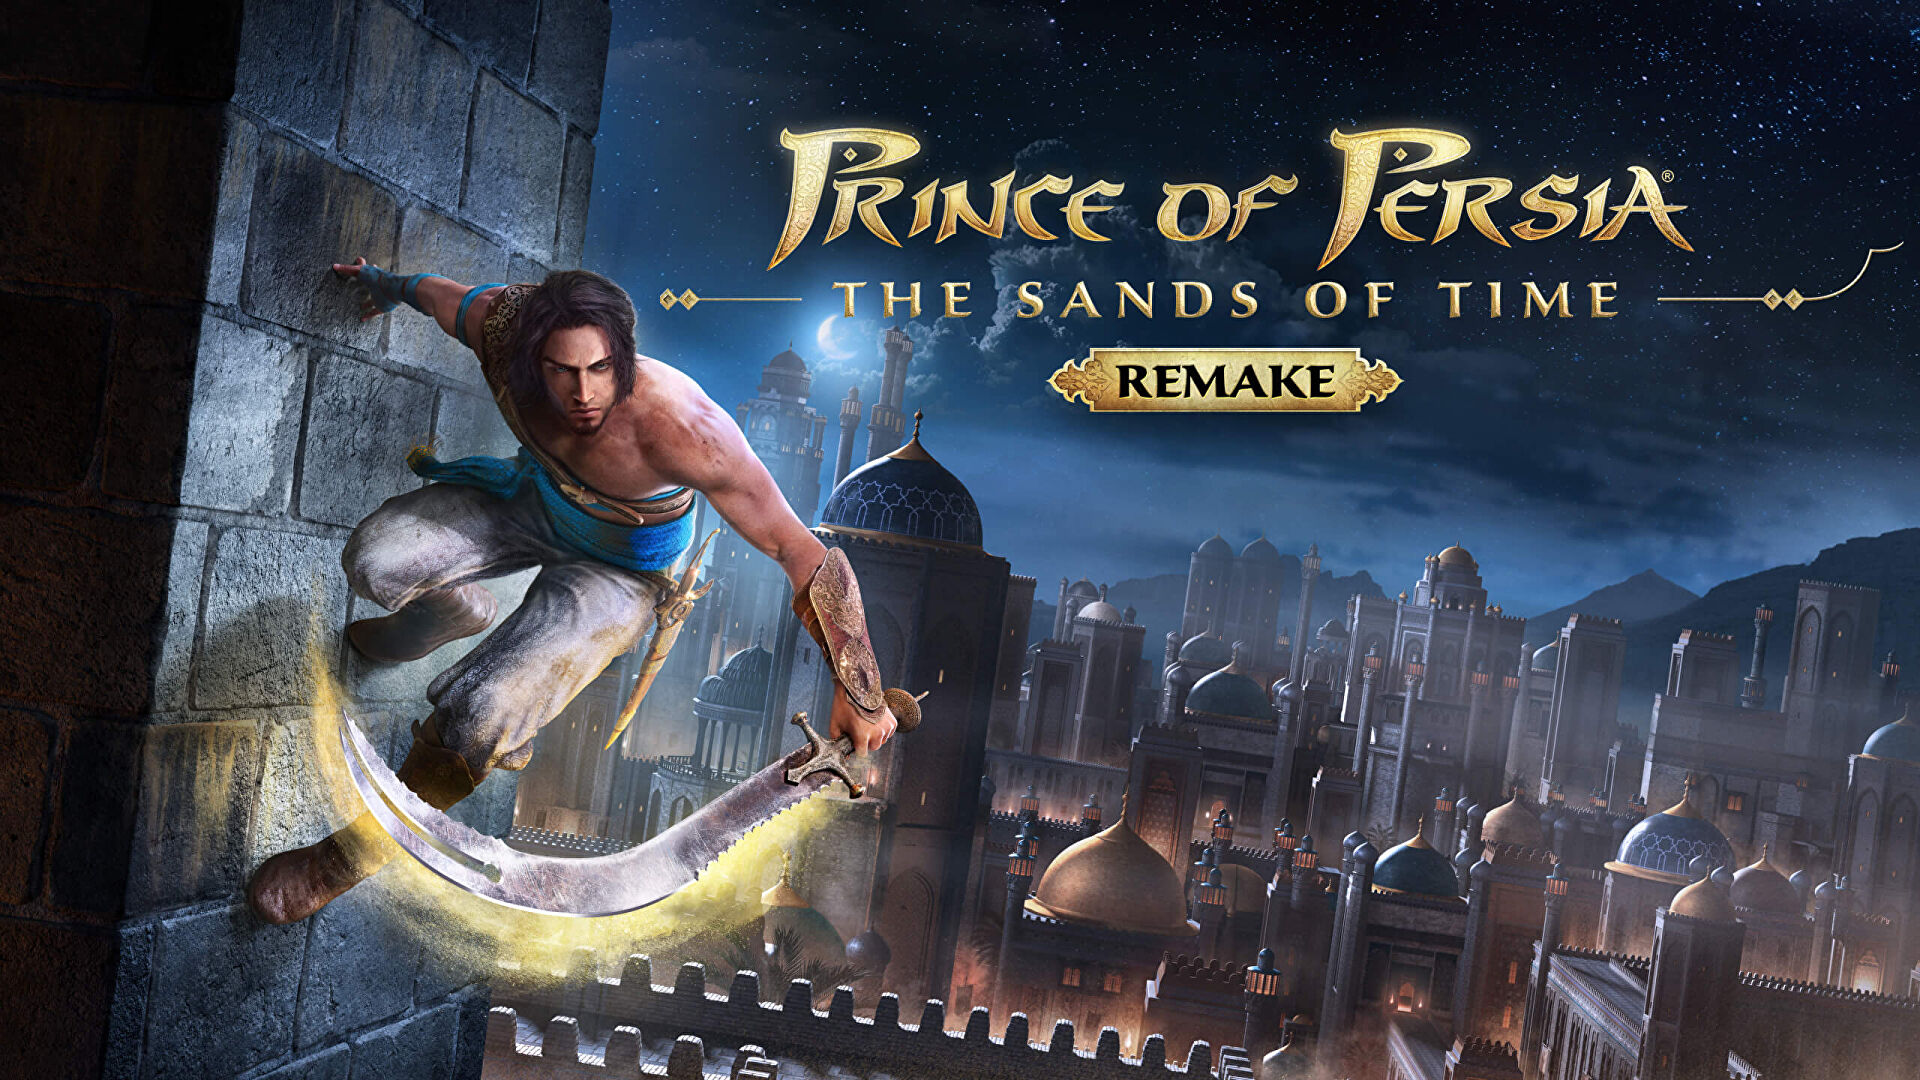 Prince of Persia Remake pre-orders are being refunded — Ubisoft insists it’s not cancelled